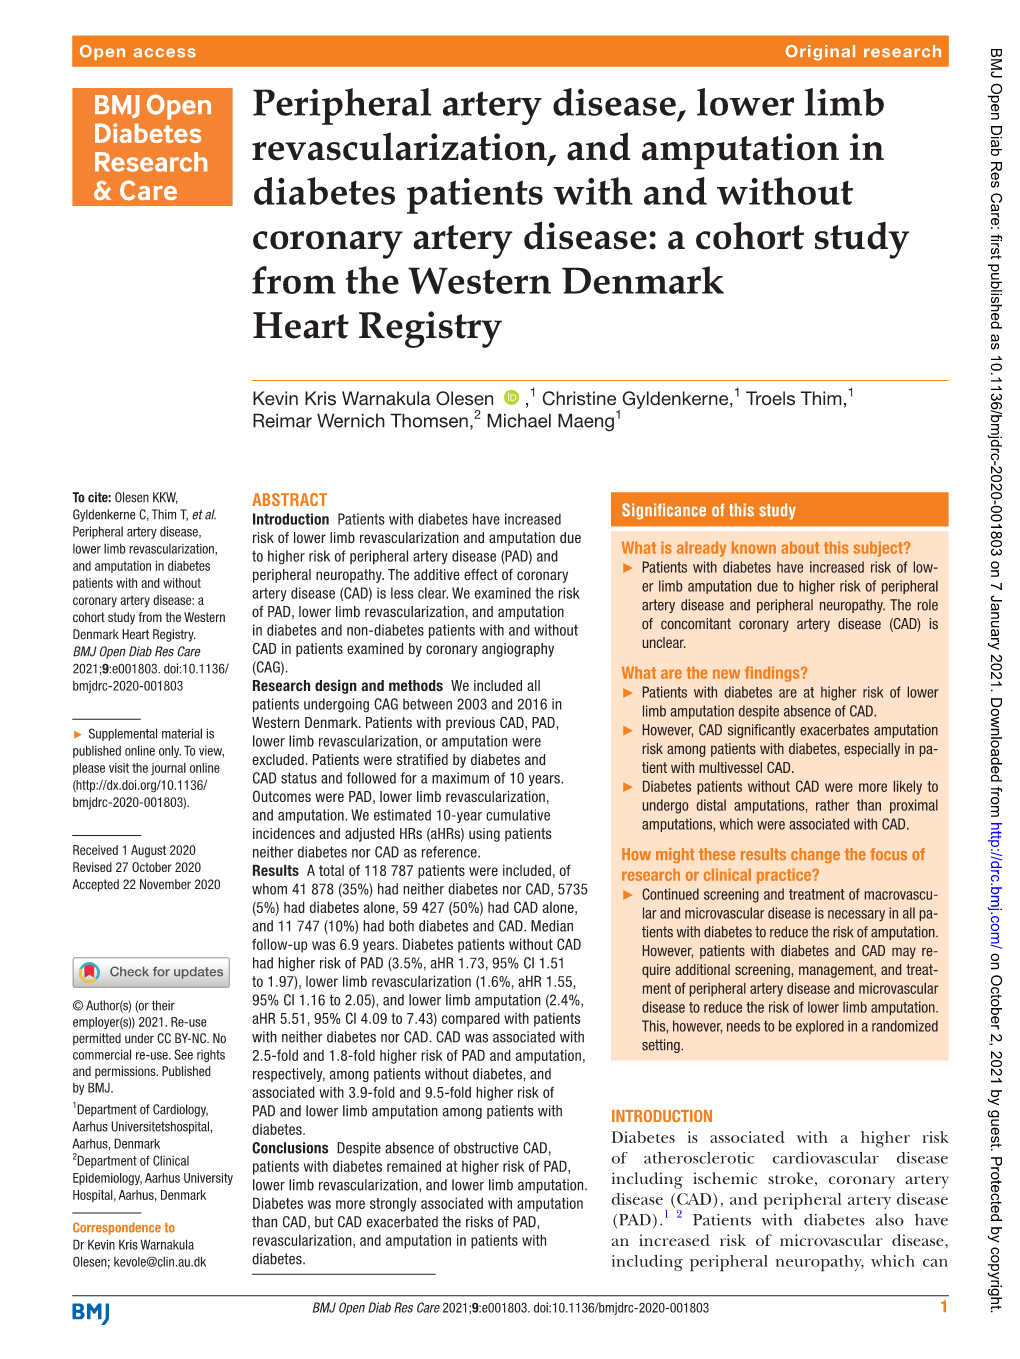 Peripheral Artery Disease, Lower Limb Revascularization, and Amputation in Diabetes Patients with and Without Coronary Artery Di